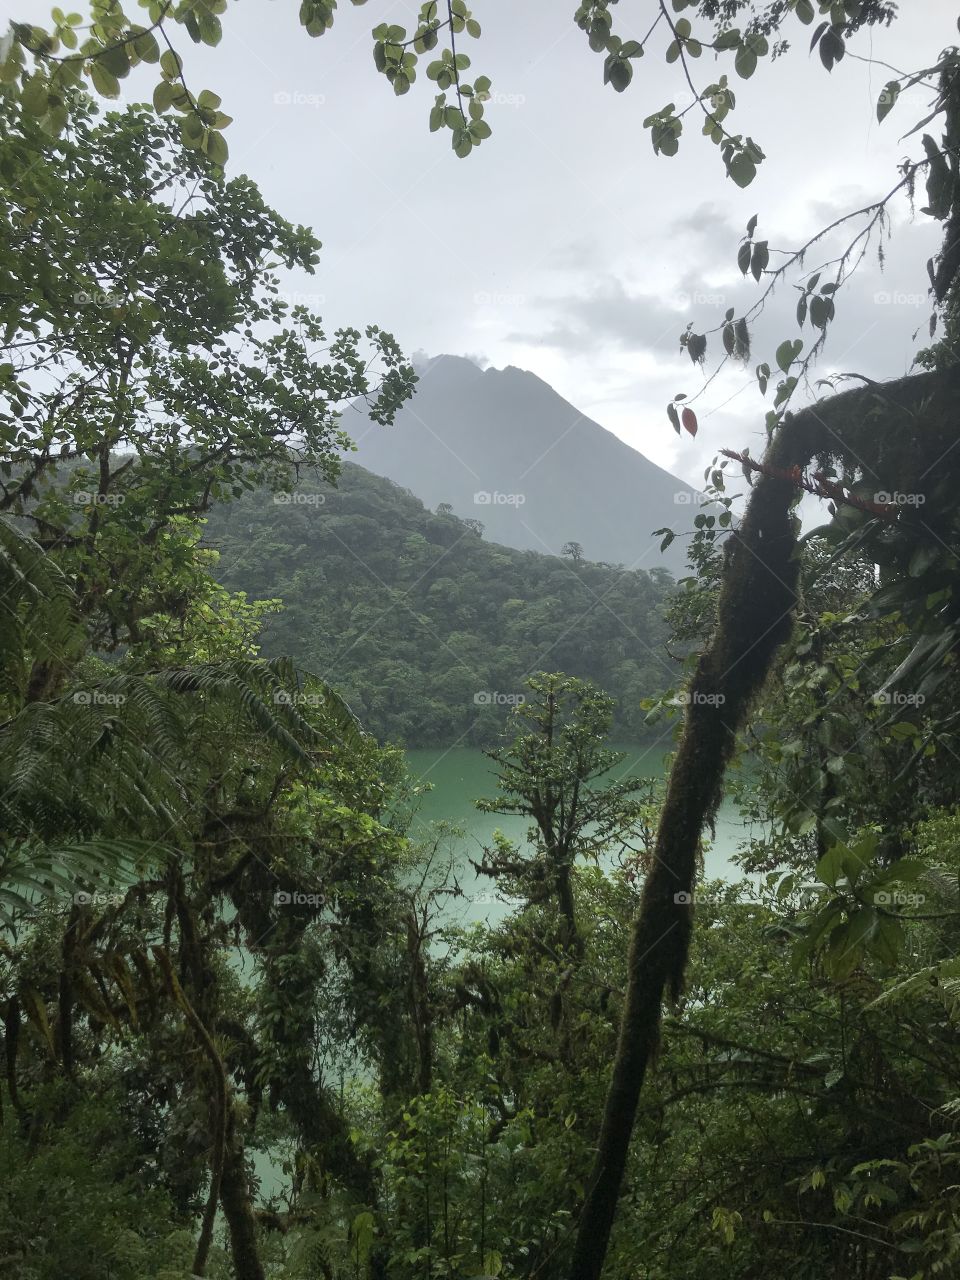 At the top of an inactive volcano overlooking its crater filled green lagoon with the active Arenal volcano in the background! It's amazing the natural beauty's of life and everything they have to offer!